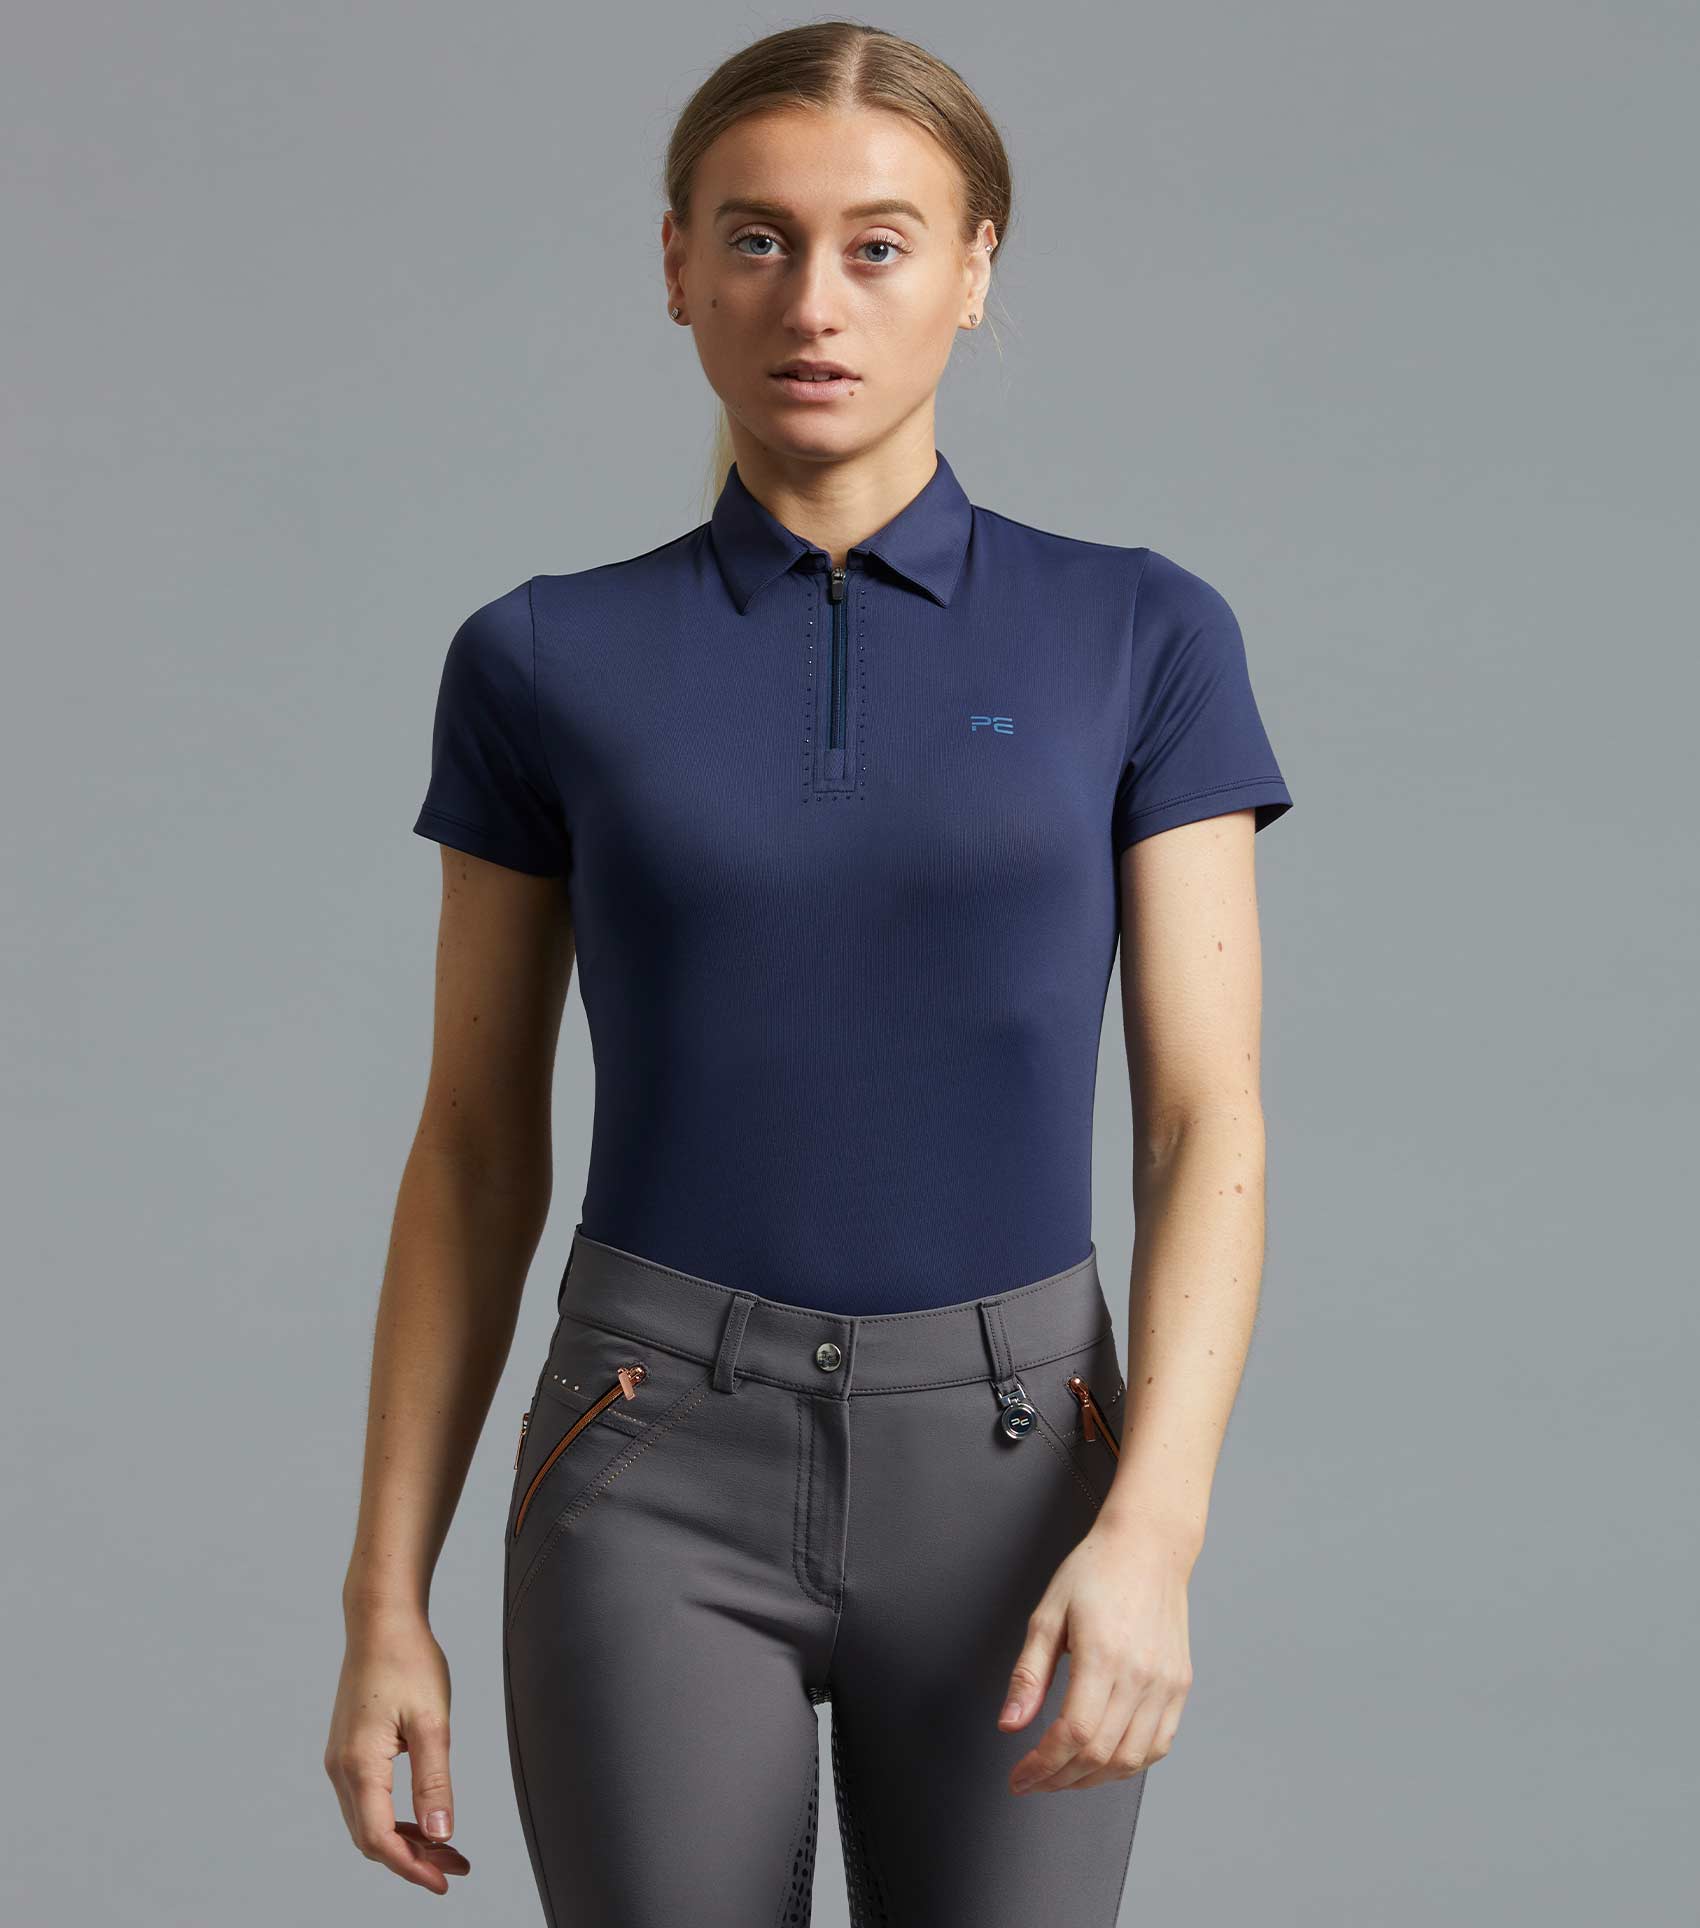 The Knit Polo - Women's Polo Shirts - Brass Clothing Olive / M